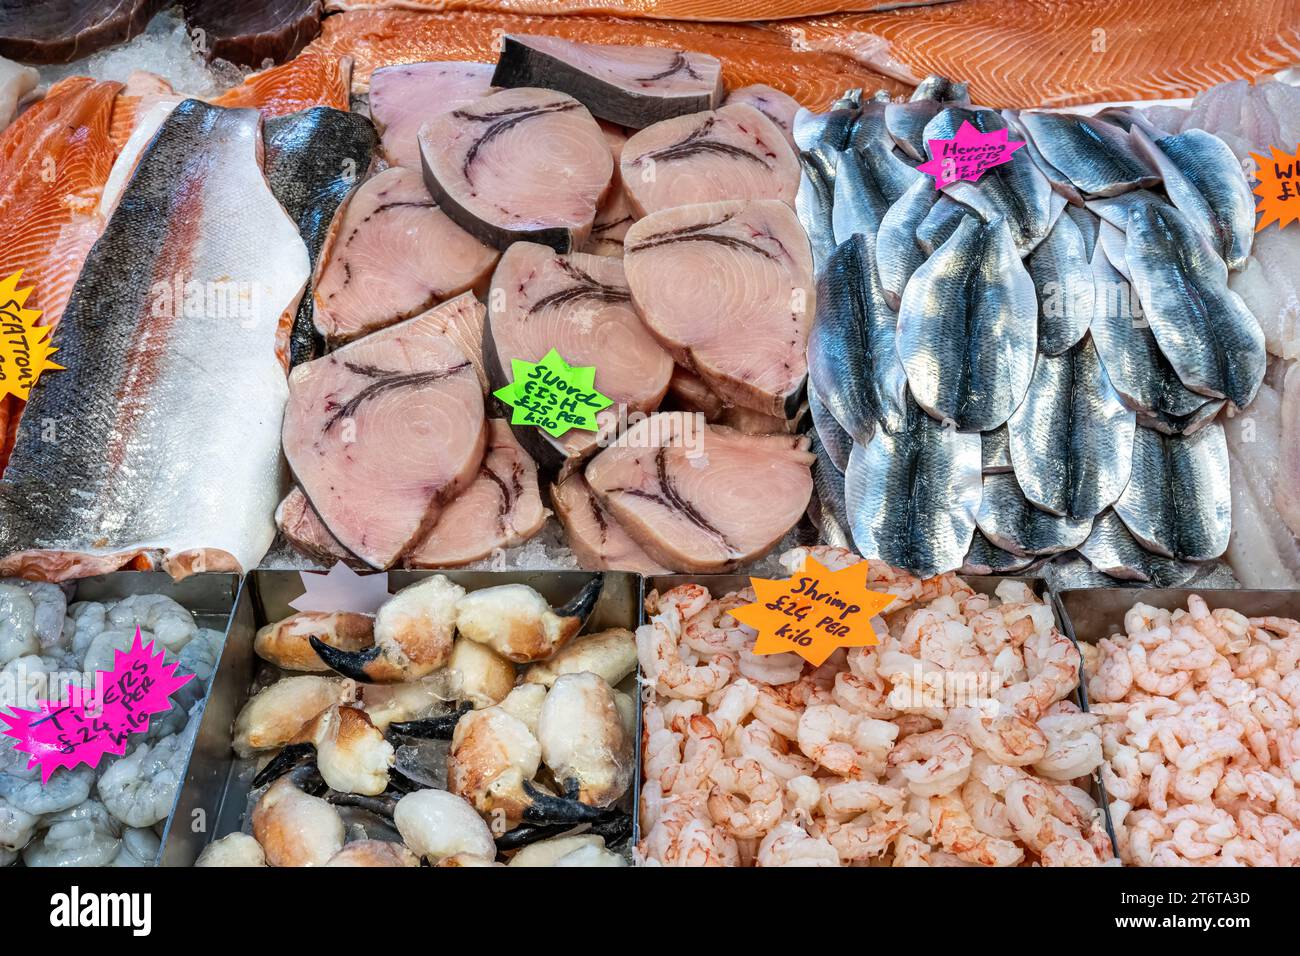 Fish and seafood seen at a market in Belfast, Northern Ireland Stock Photo